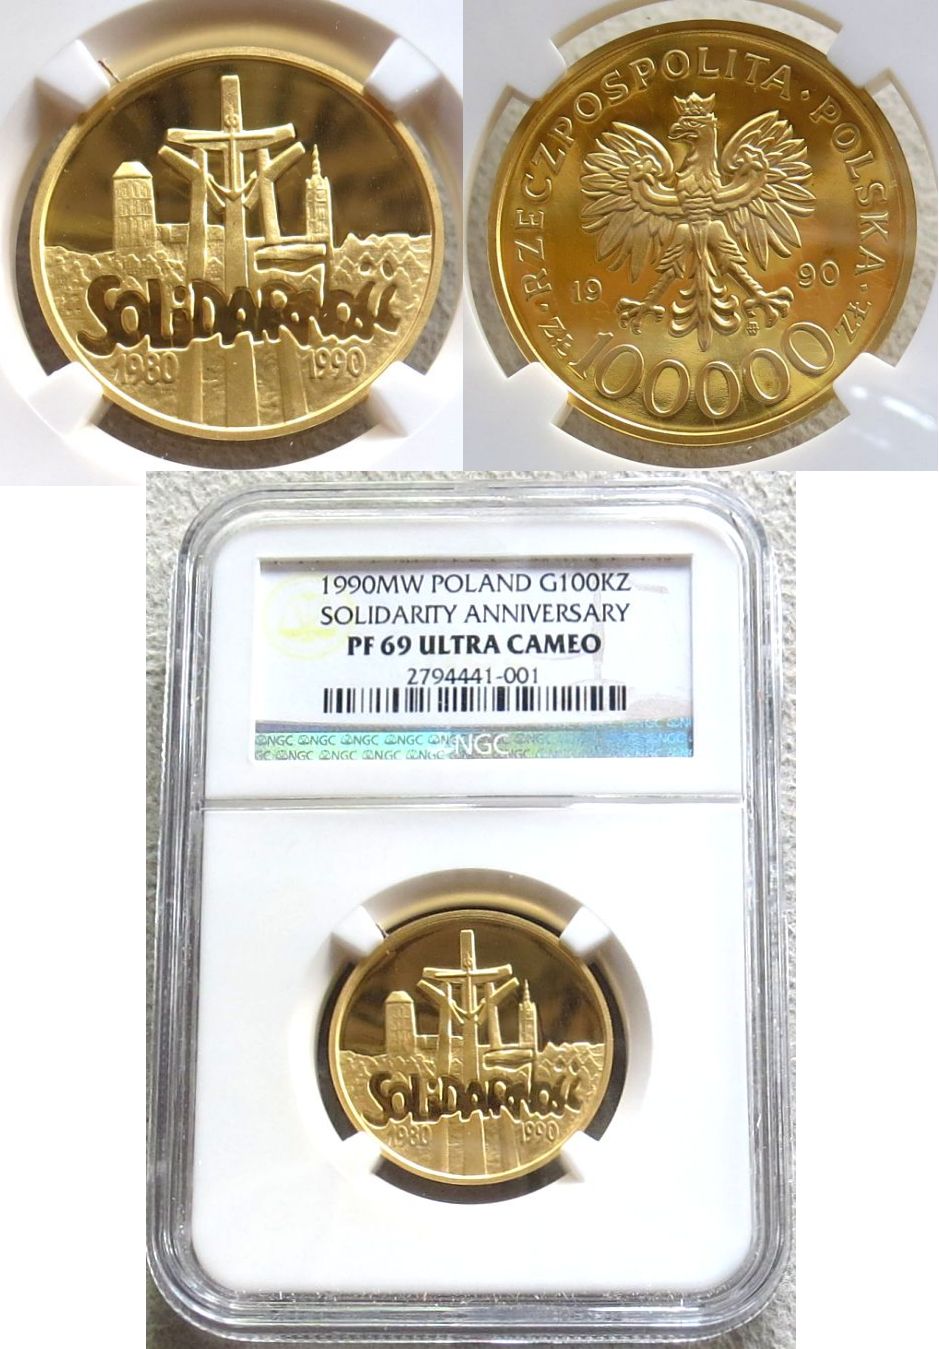 1990 GOLD POLAND 1,000 ZLOTYCH NGC PROOF 69 ULTRA CAMEO "SOLIDARITY ANNIVERSARY"